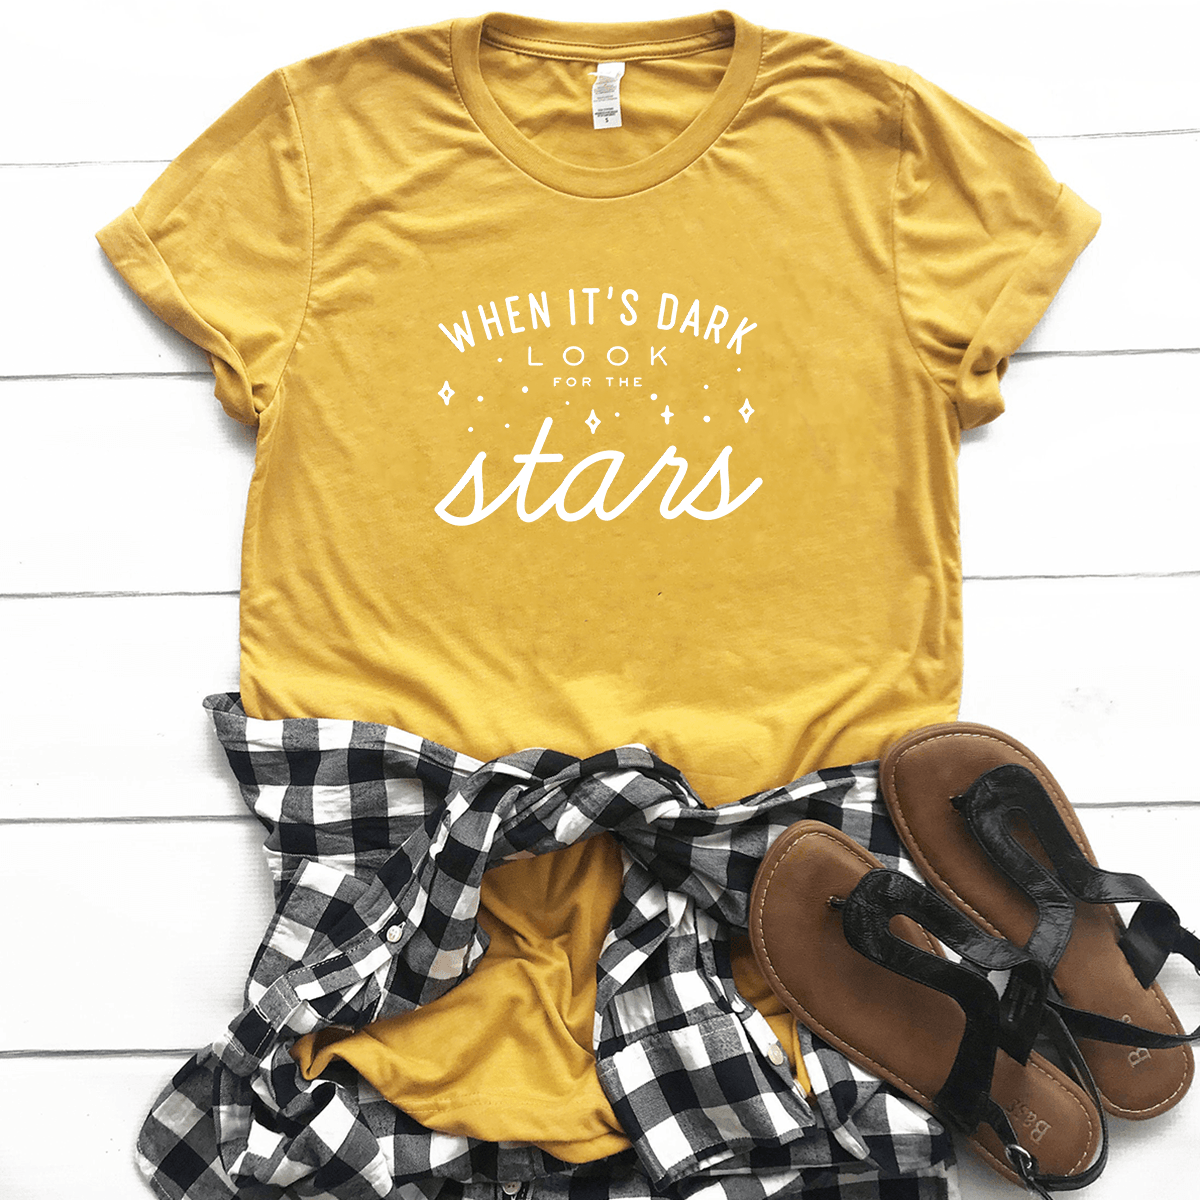 When it's Dark, Look for the Stars - Bella+Canvas Tee